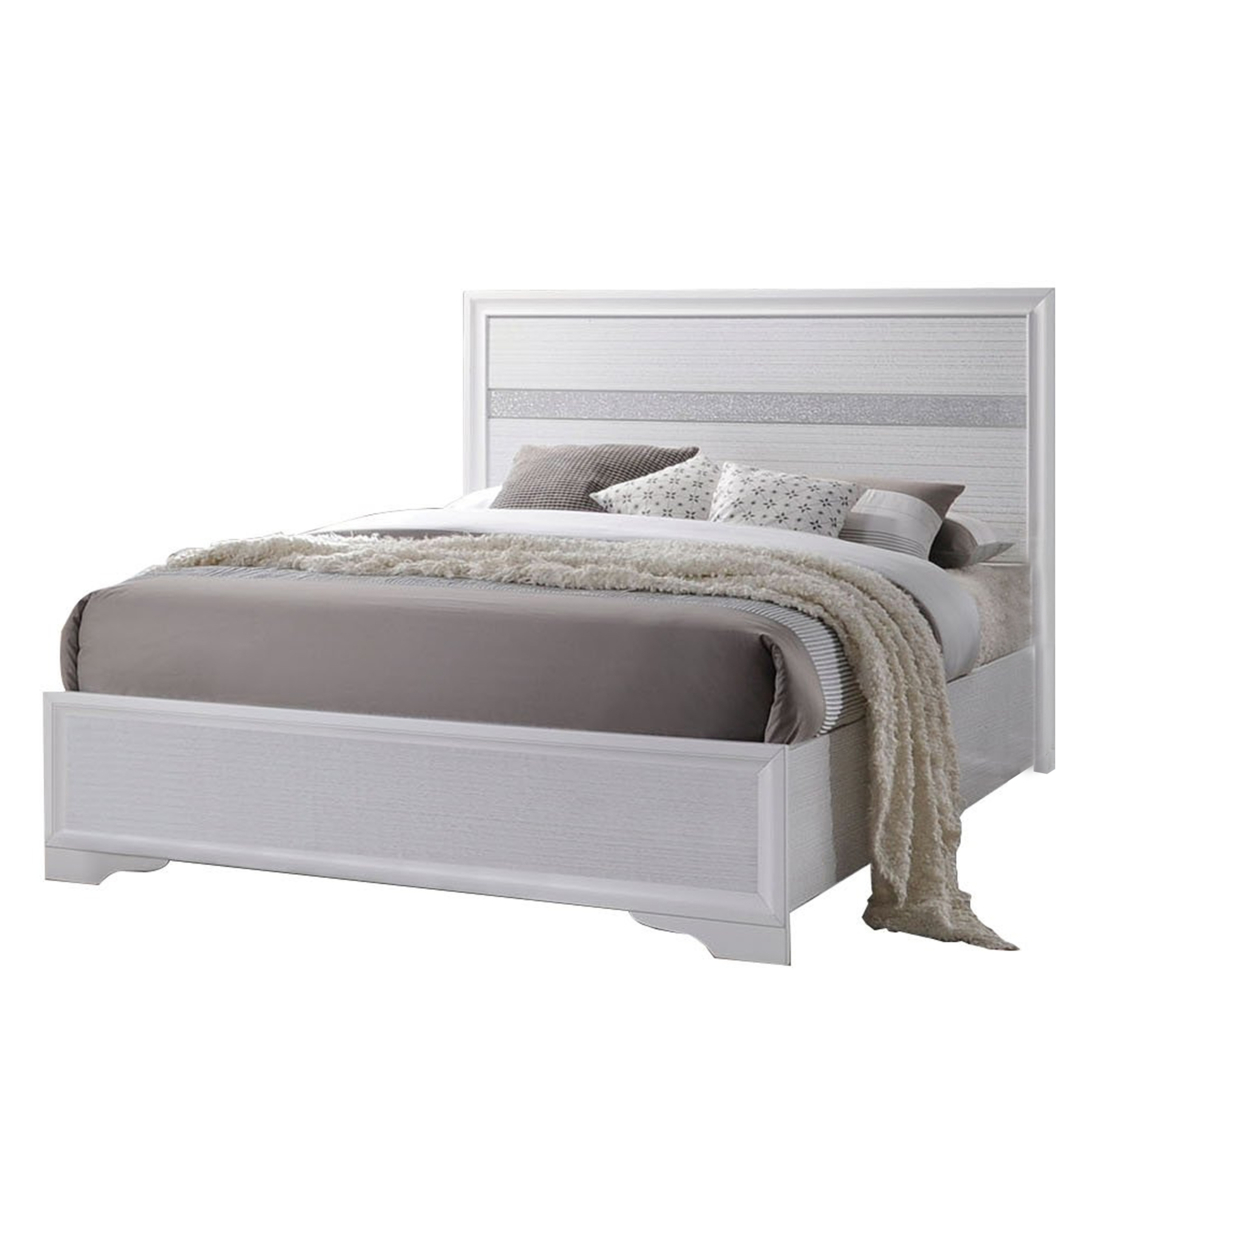 Wooden Twin Size Bed With Bracket Legs And Crystal Accented Headboard, White- Saltoro Sherpi